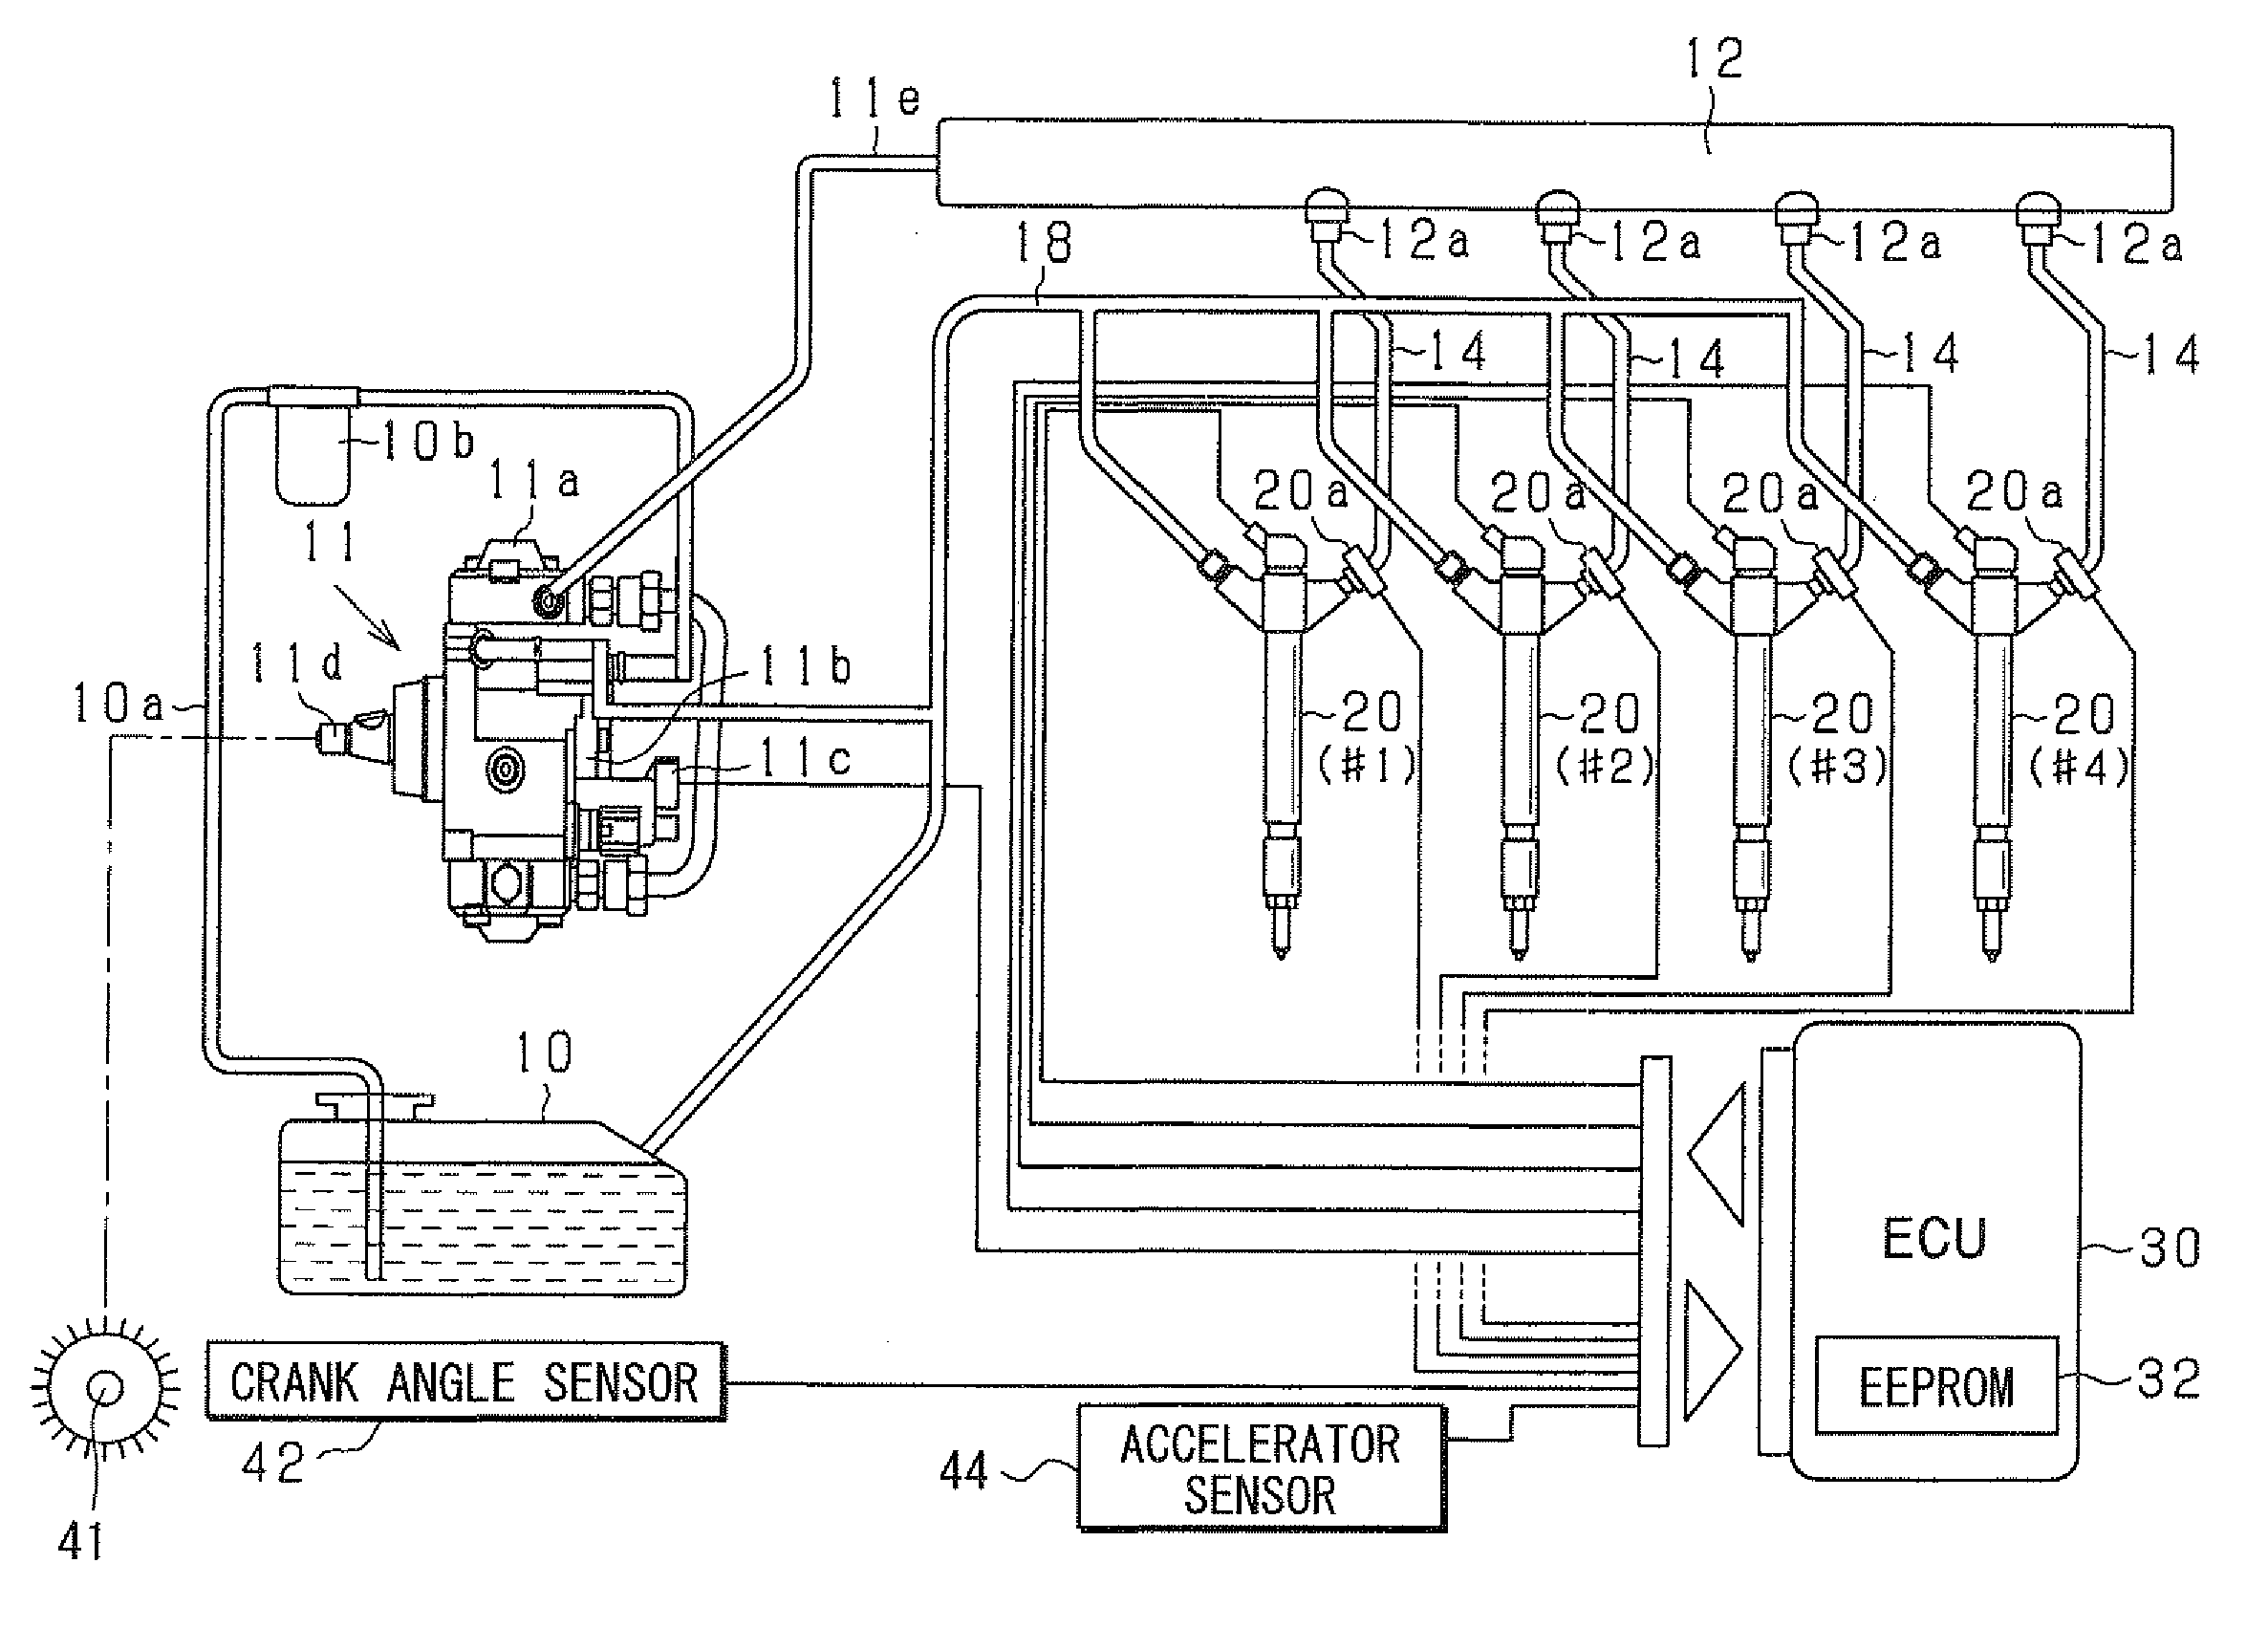 Fuel injection controller for internal combustion engine